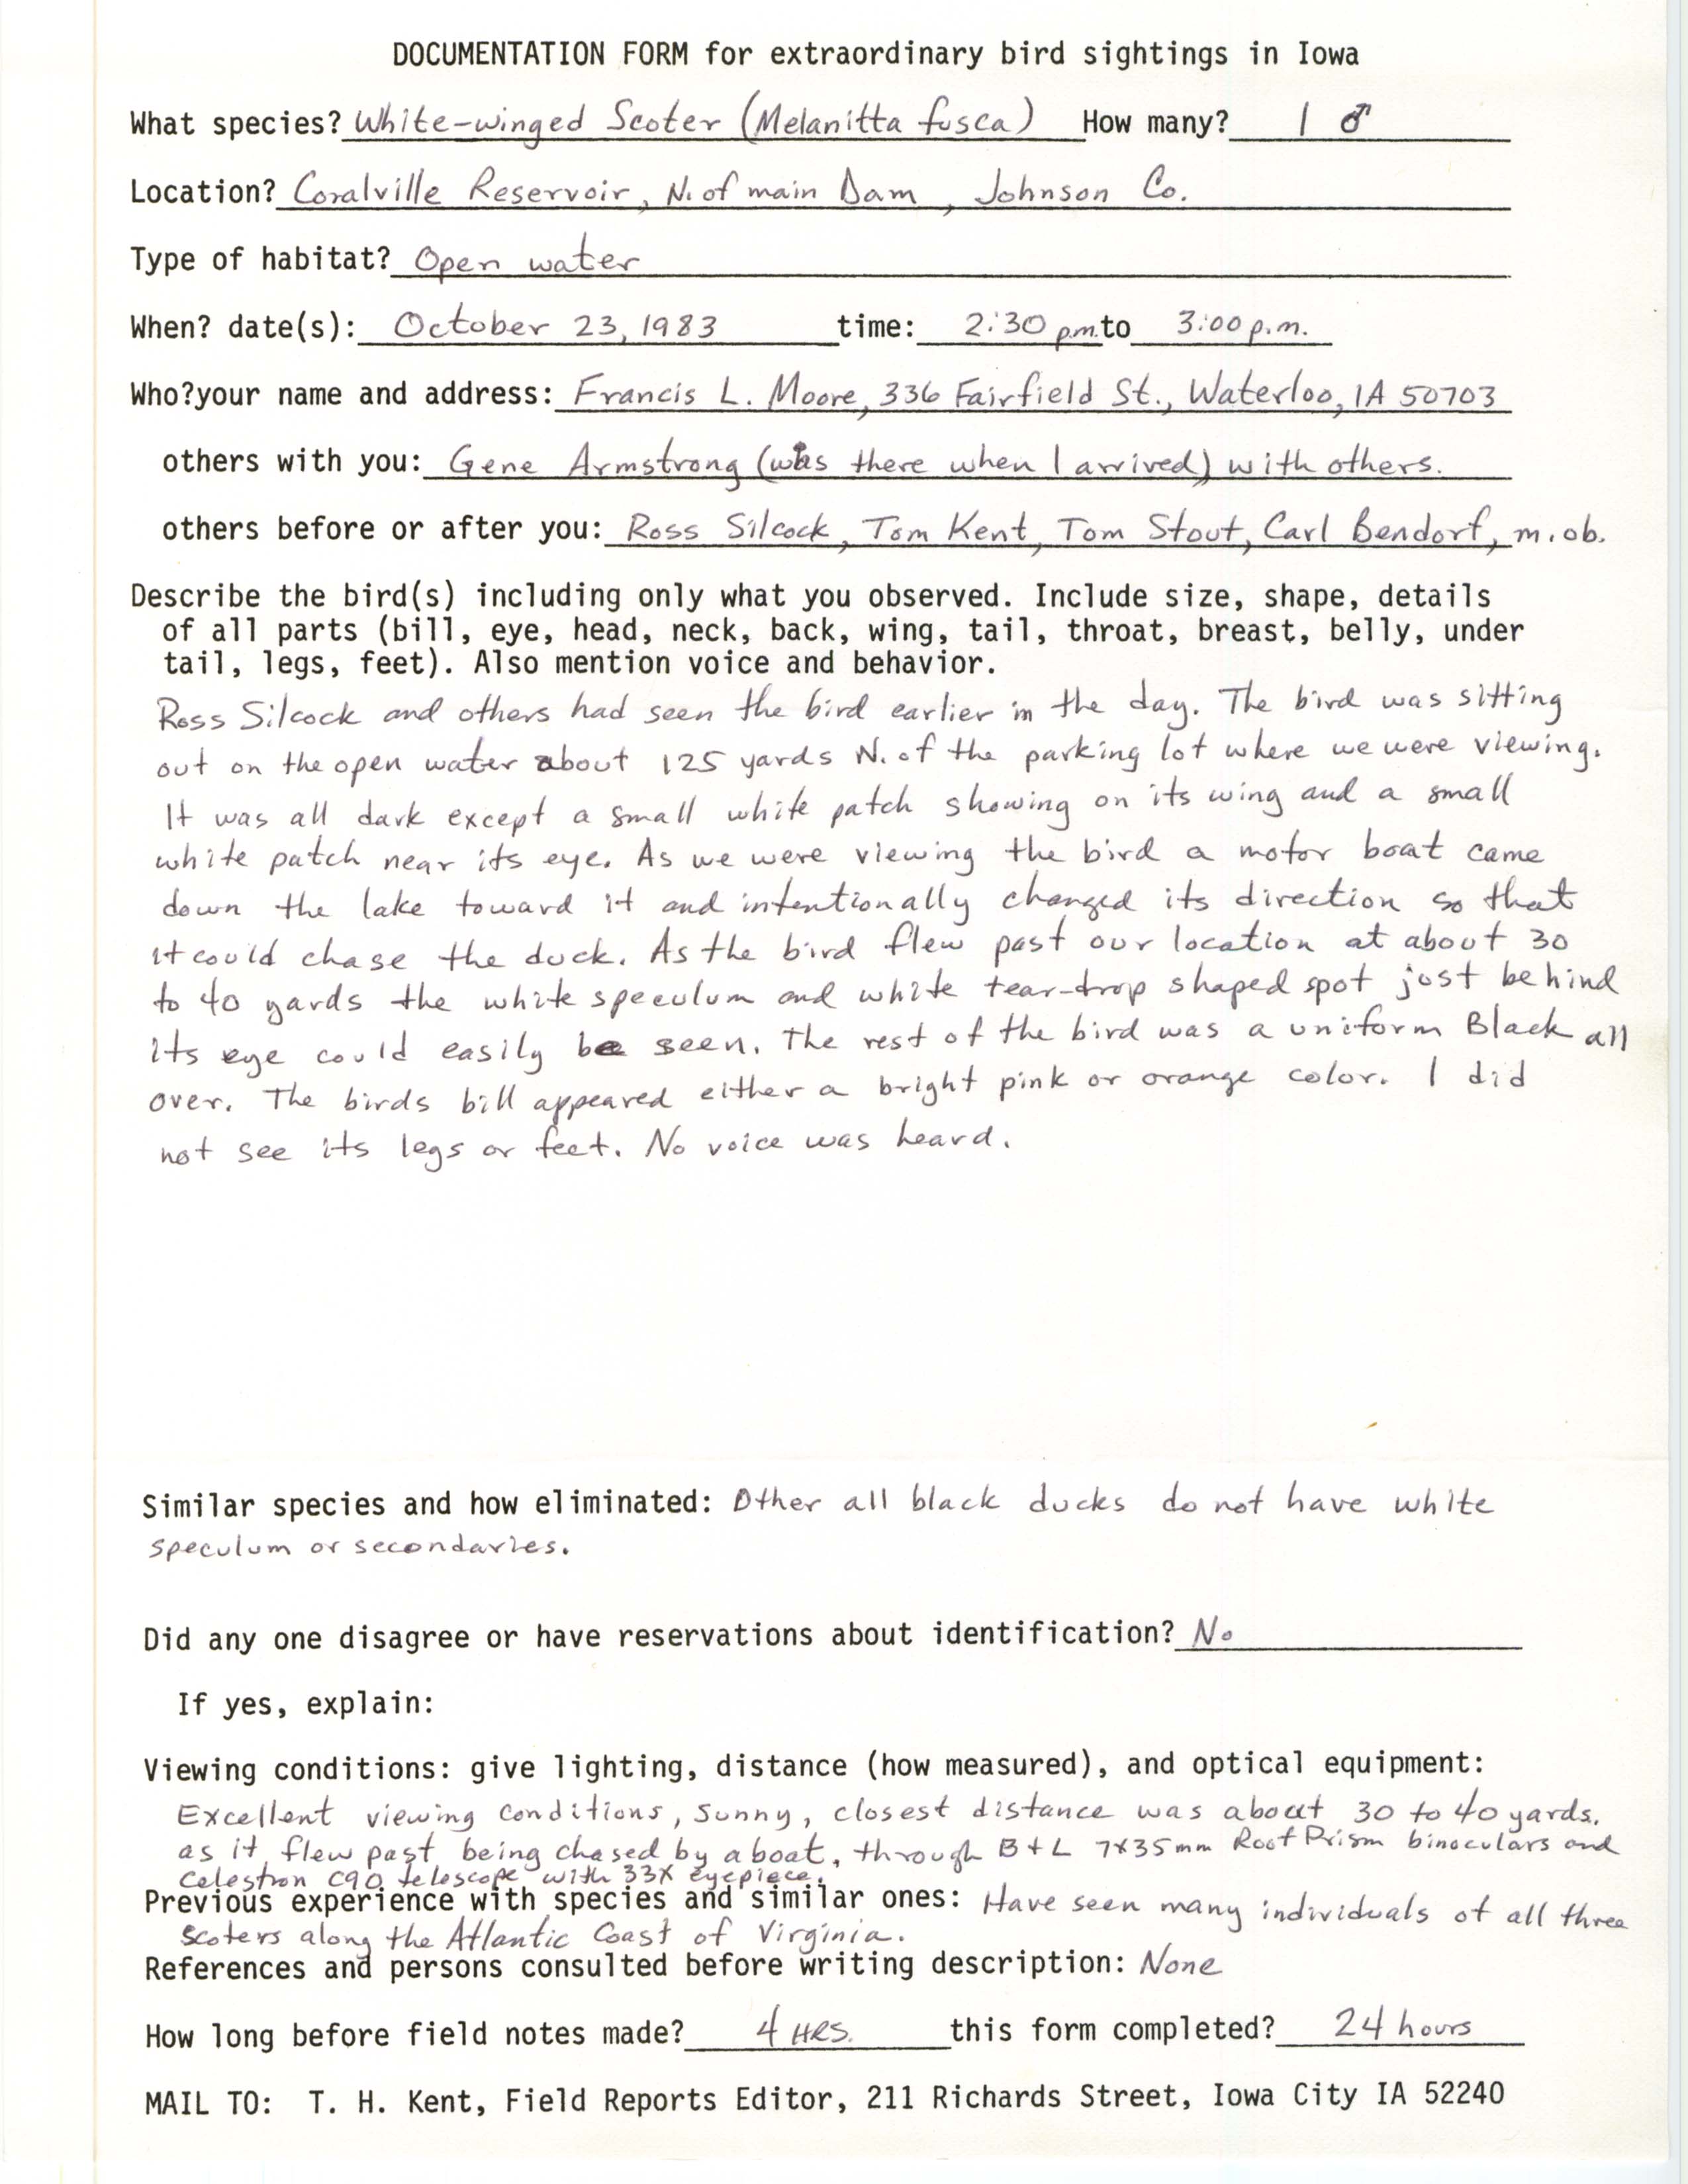 Rare bird documentation form for White-winged Scoter at Coralville Reservoir in 1983